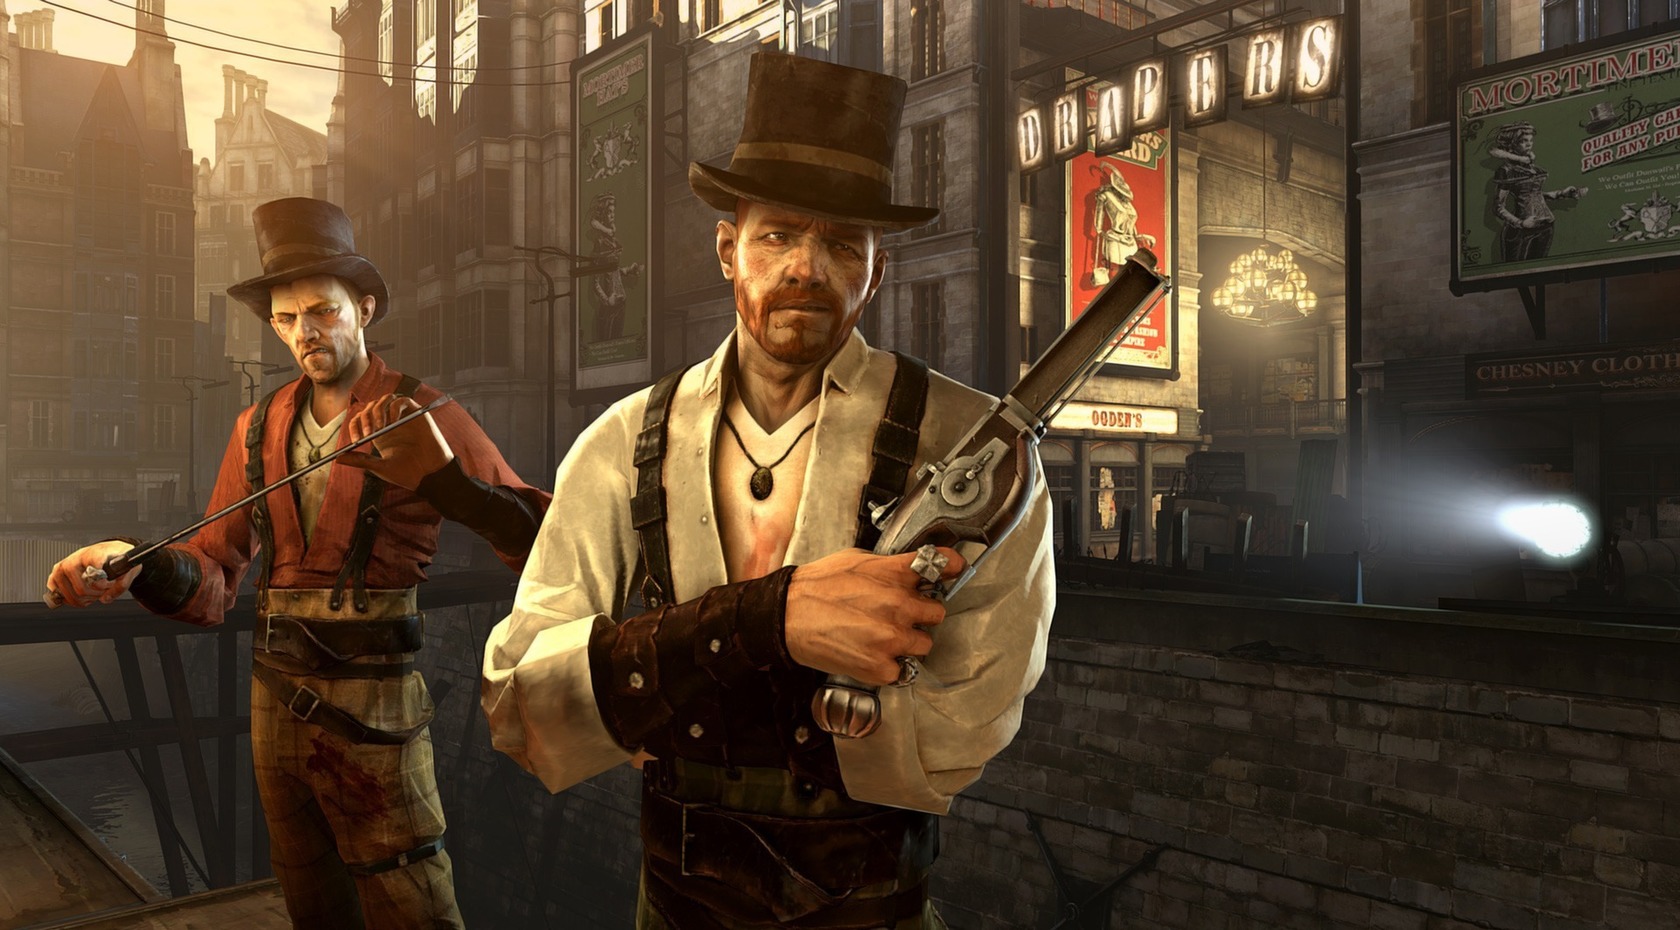 Epic Games Store solta os jogos City of Gangsters e Dishonored